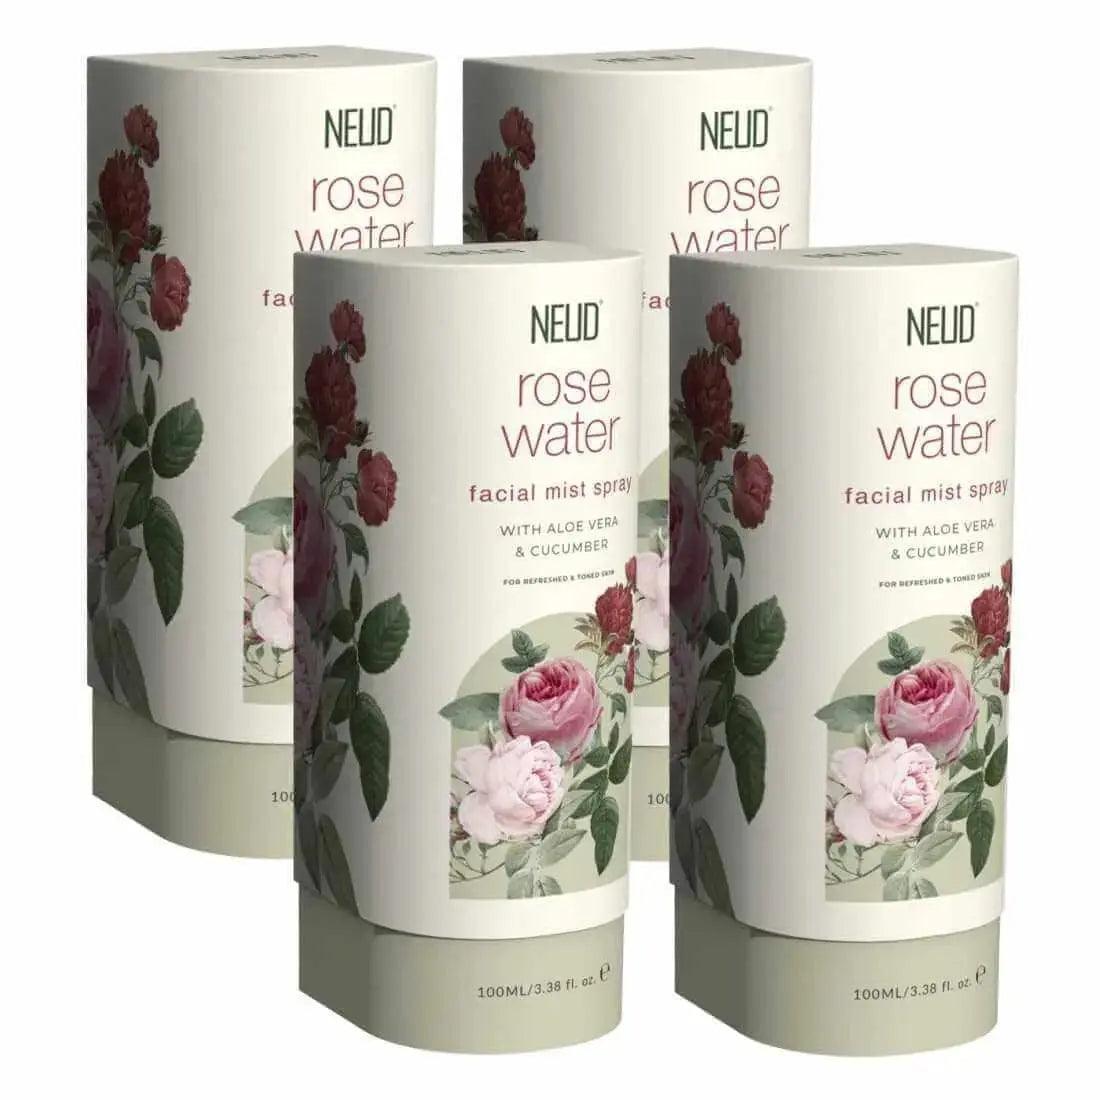 NEUD Rose Water Facial Mist Spray For Refreshed and Toned Skin - 100 ml 9559682313102